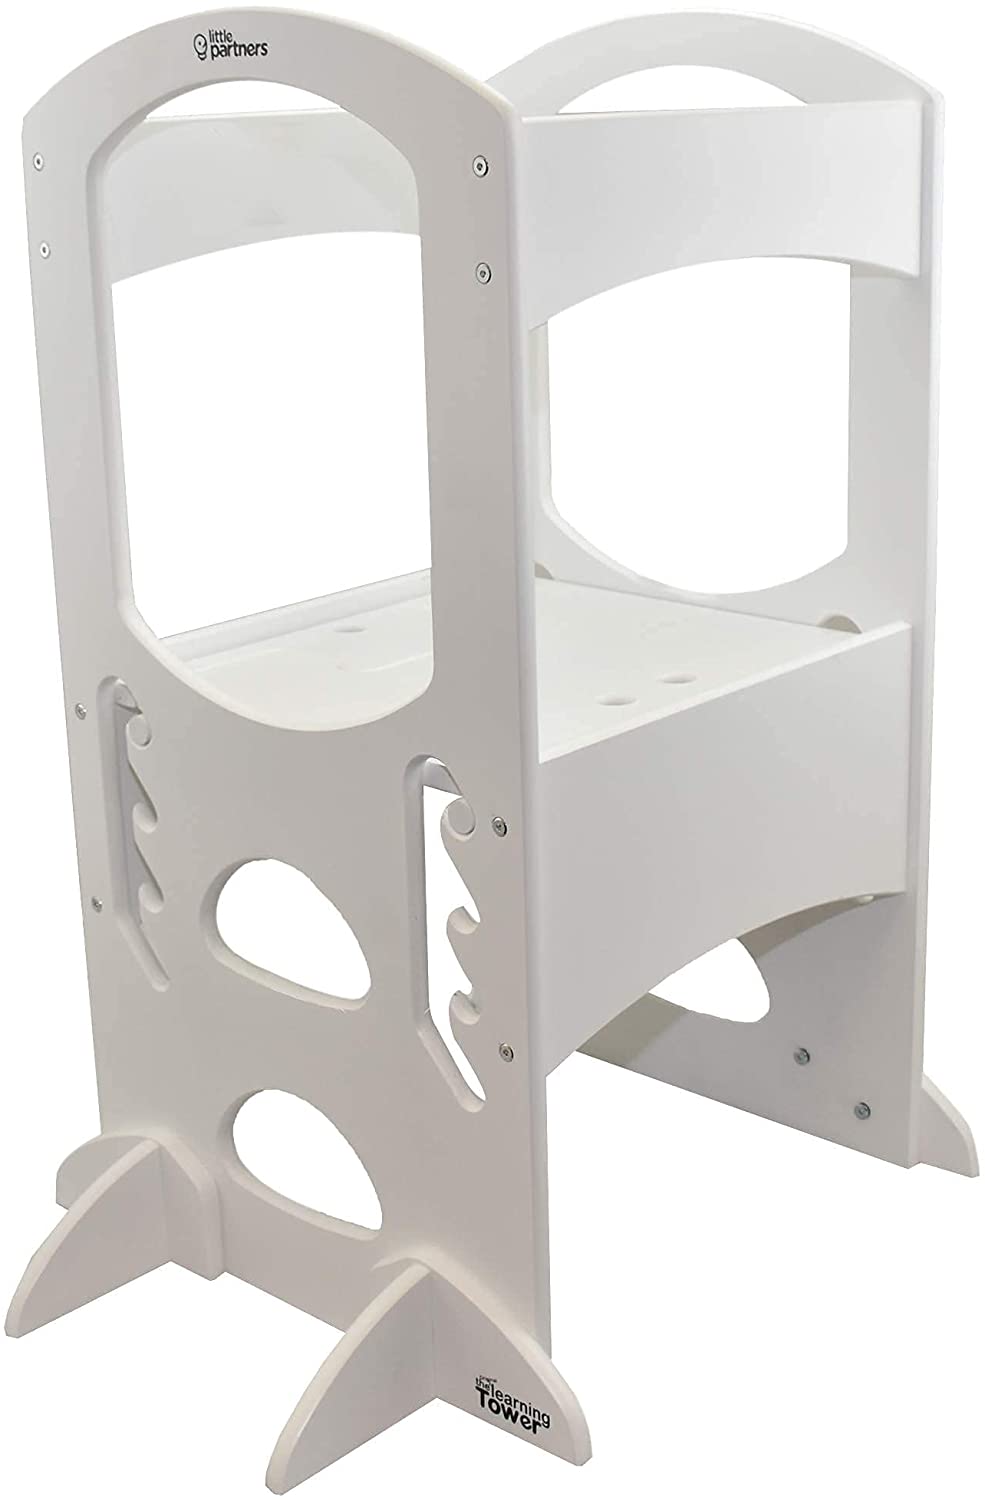 ORIGINAL LEARNING TOWER WHITE